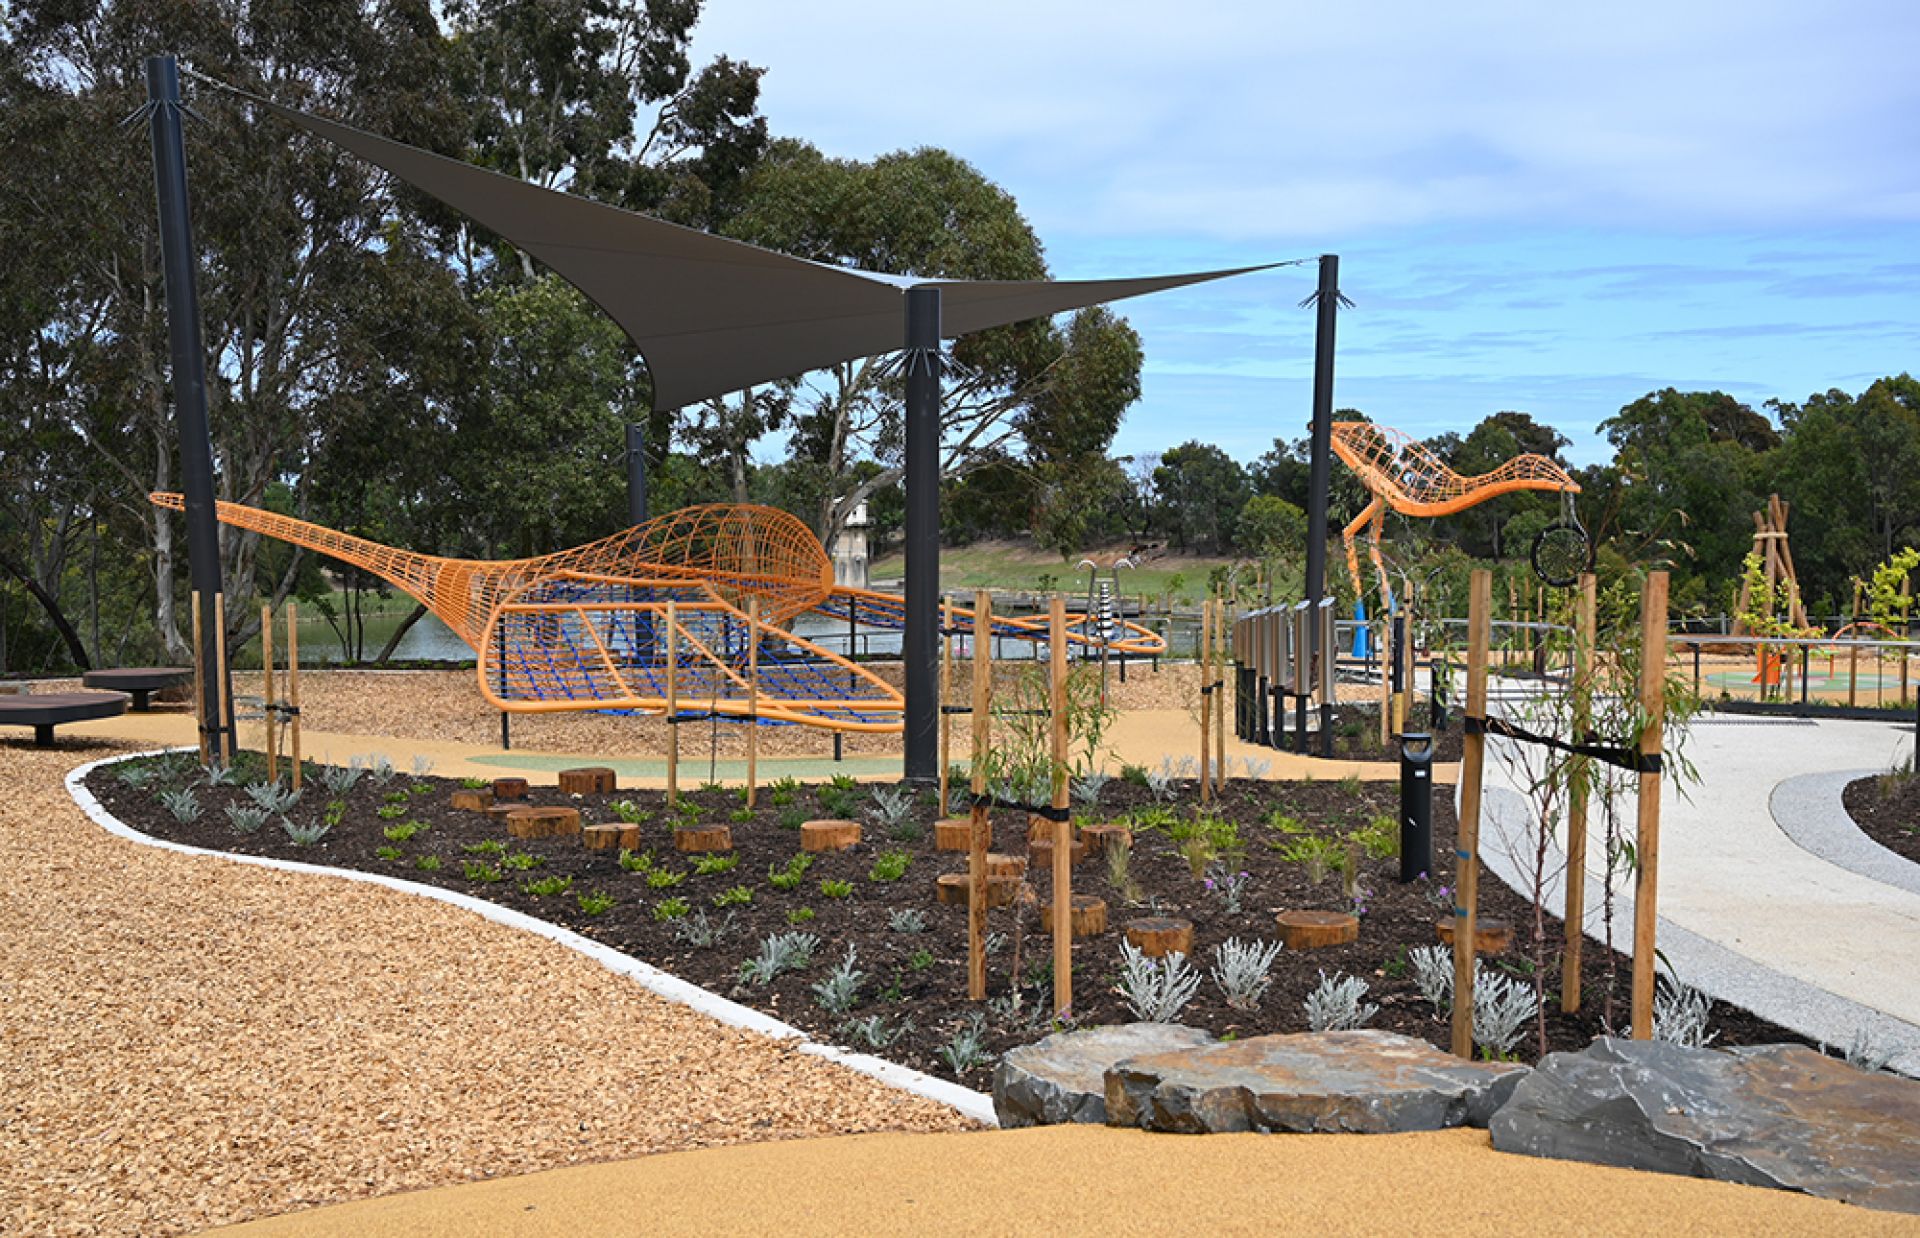 Thorndon Park Playground - Climbing structure and percussion play